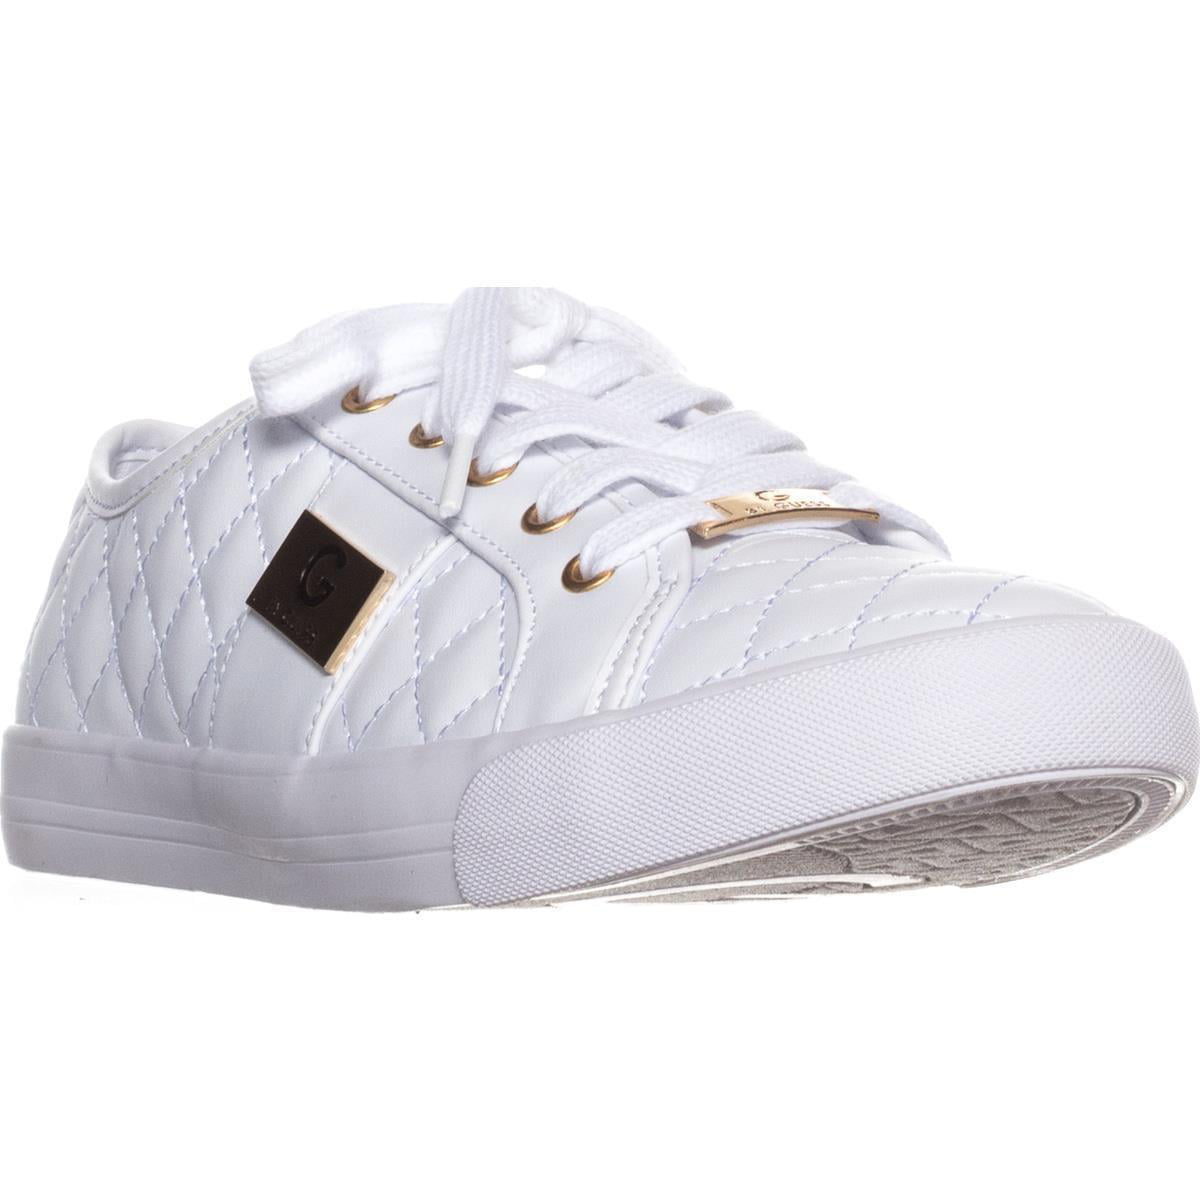 Womens G by Guess Backer2 Quilted Fashion Sneakers, White, 8.5 US ...